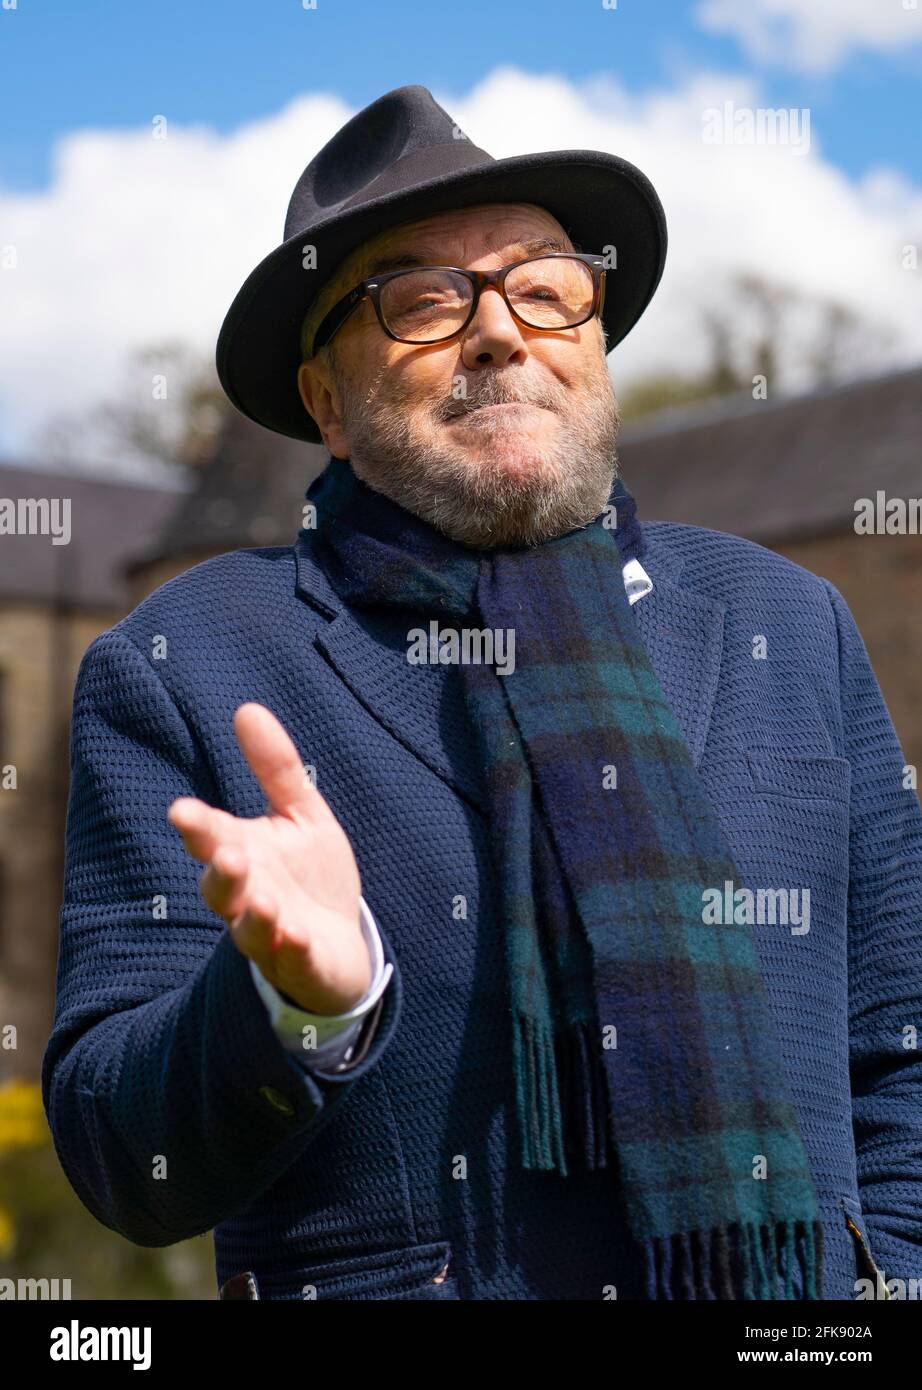 Jedburgh, Scotland, UK. 29 April 2021. Founder of the All for Unity party George Galloway makes a campaign stop to canvass local people  and make a speech against a hard border with England in Jedburgh in the Scottish Borders. Iain Masterton/Alamy Live News Stock Photo